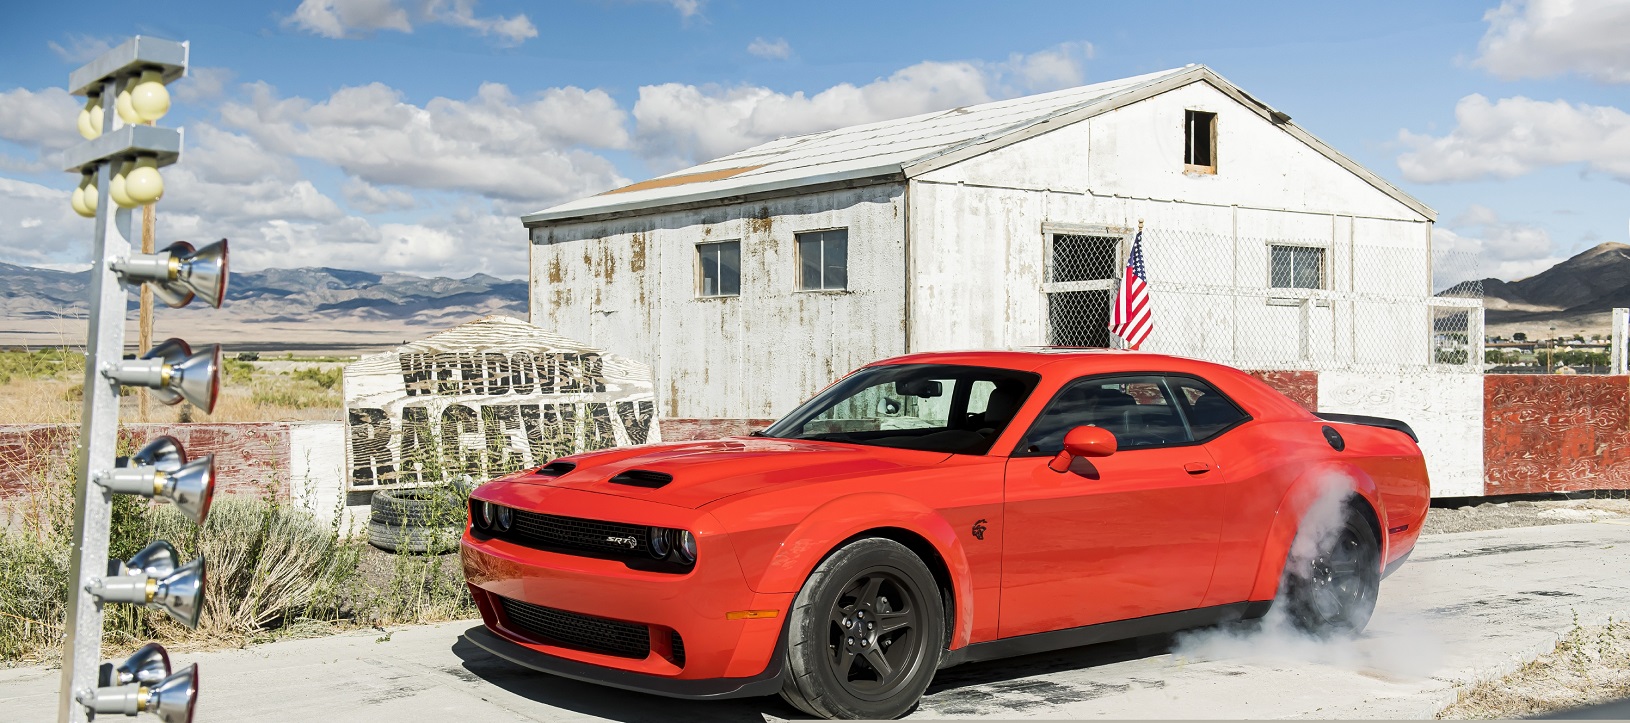 2020 Dodge Challenger SRT Super Stock: The newest Dodge drag racing machine with 807 horsepower is the world’s quickest and most powerful muscle car.